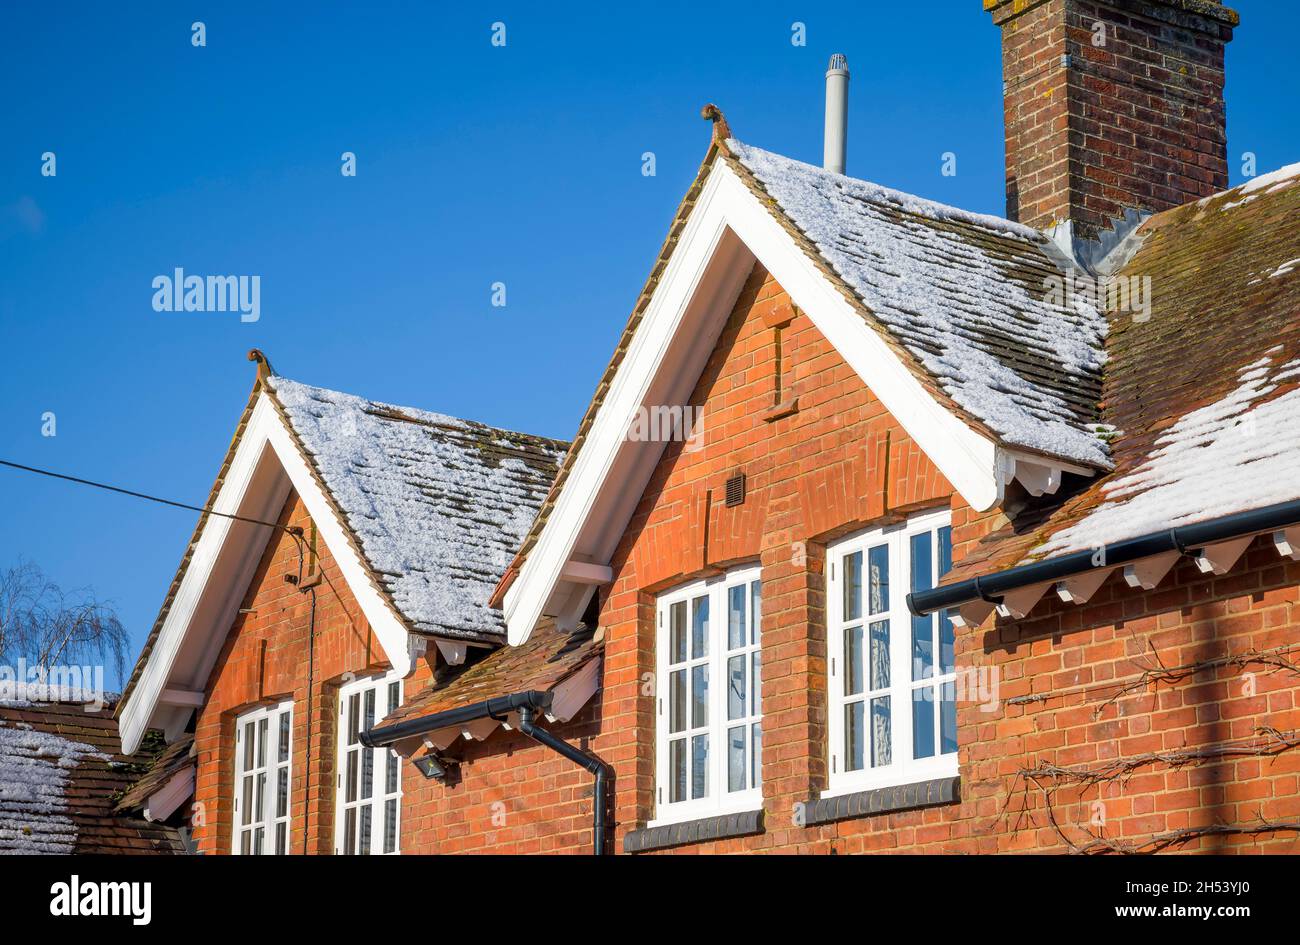 Old house with plain clay roof tiles, snow on pitched rooftop in winter, UK. Loft insulation and home improvement concepts. Stock Photo